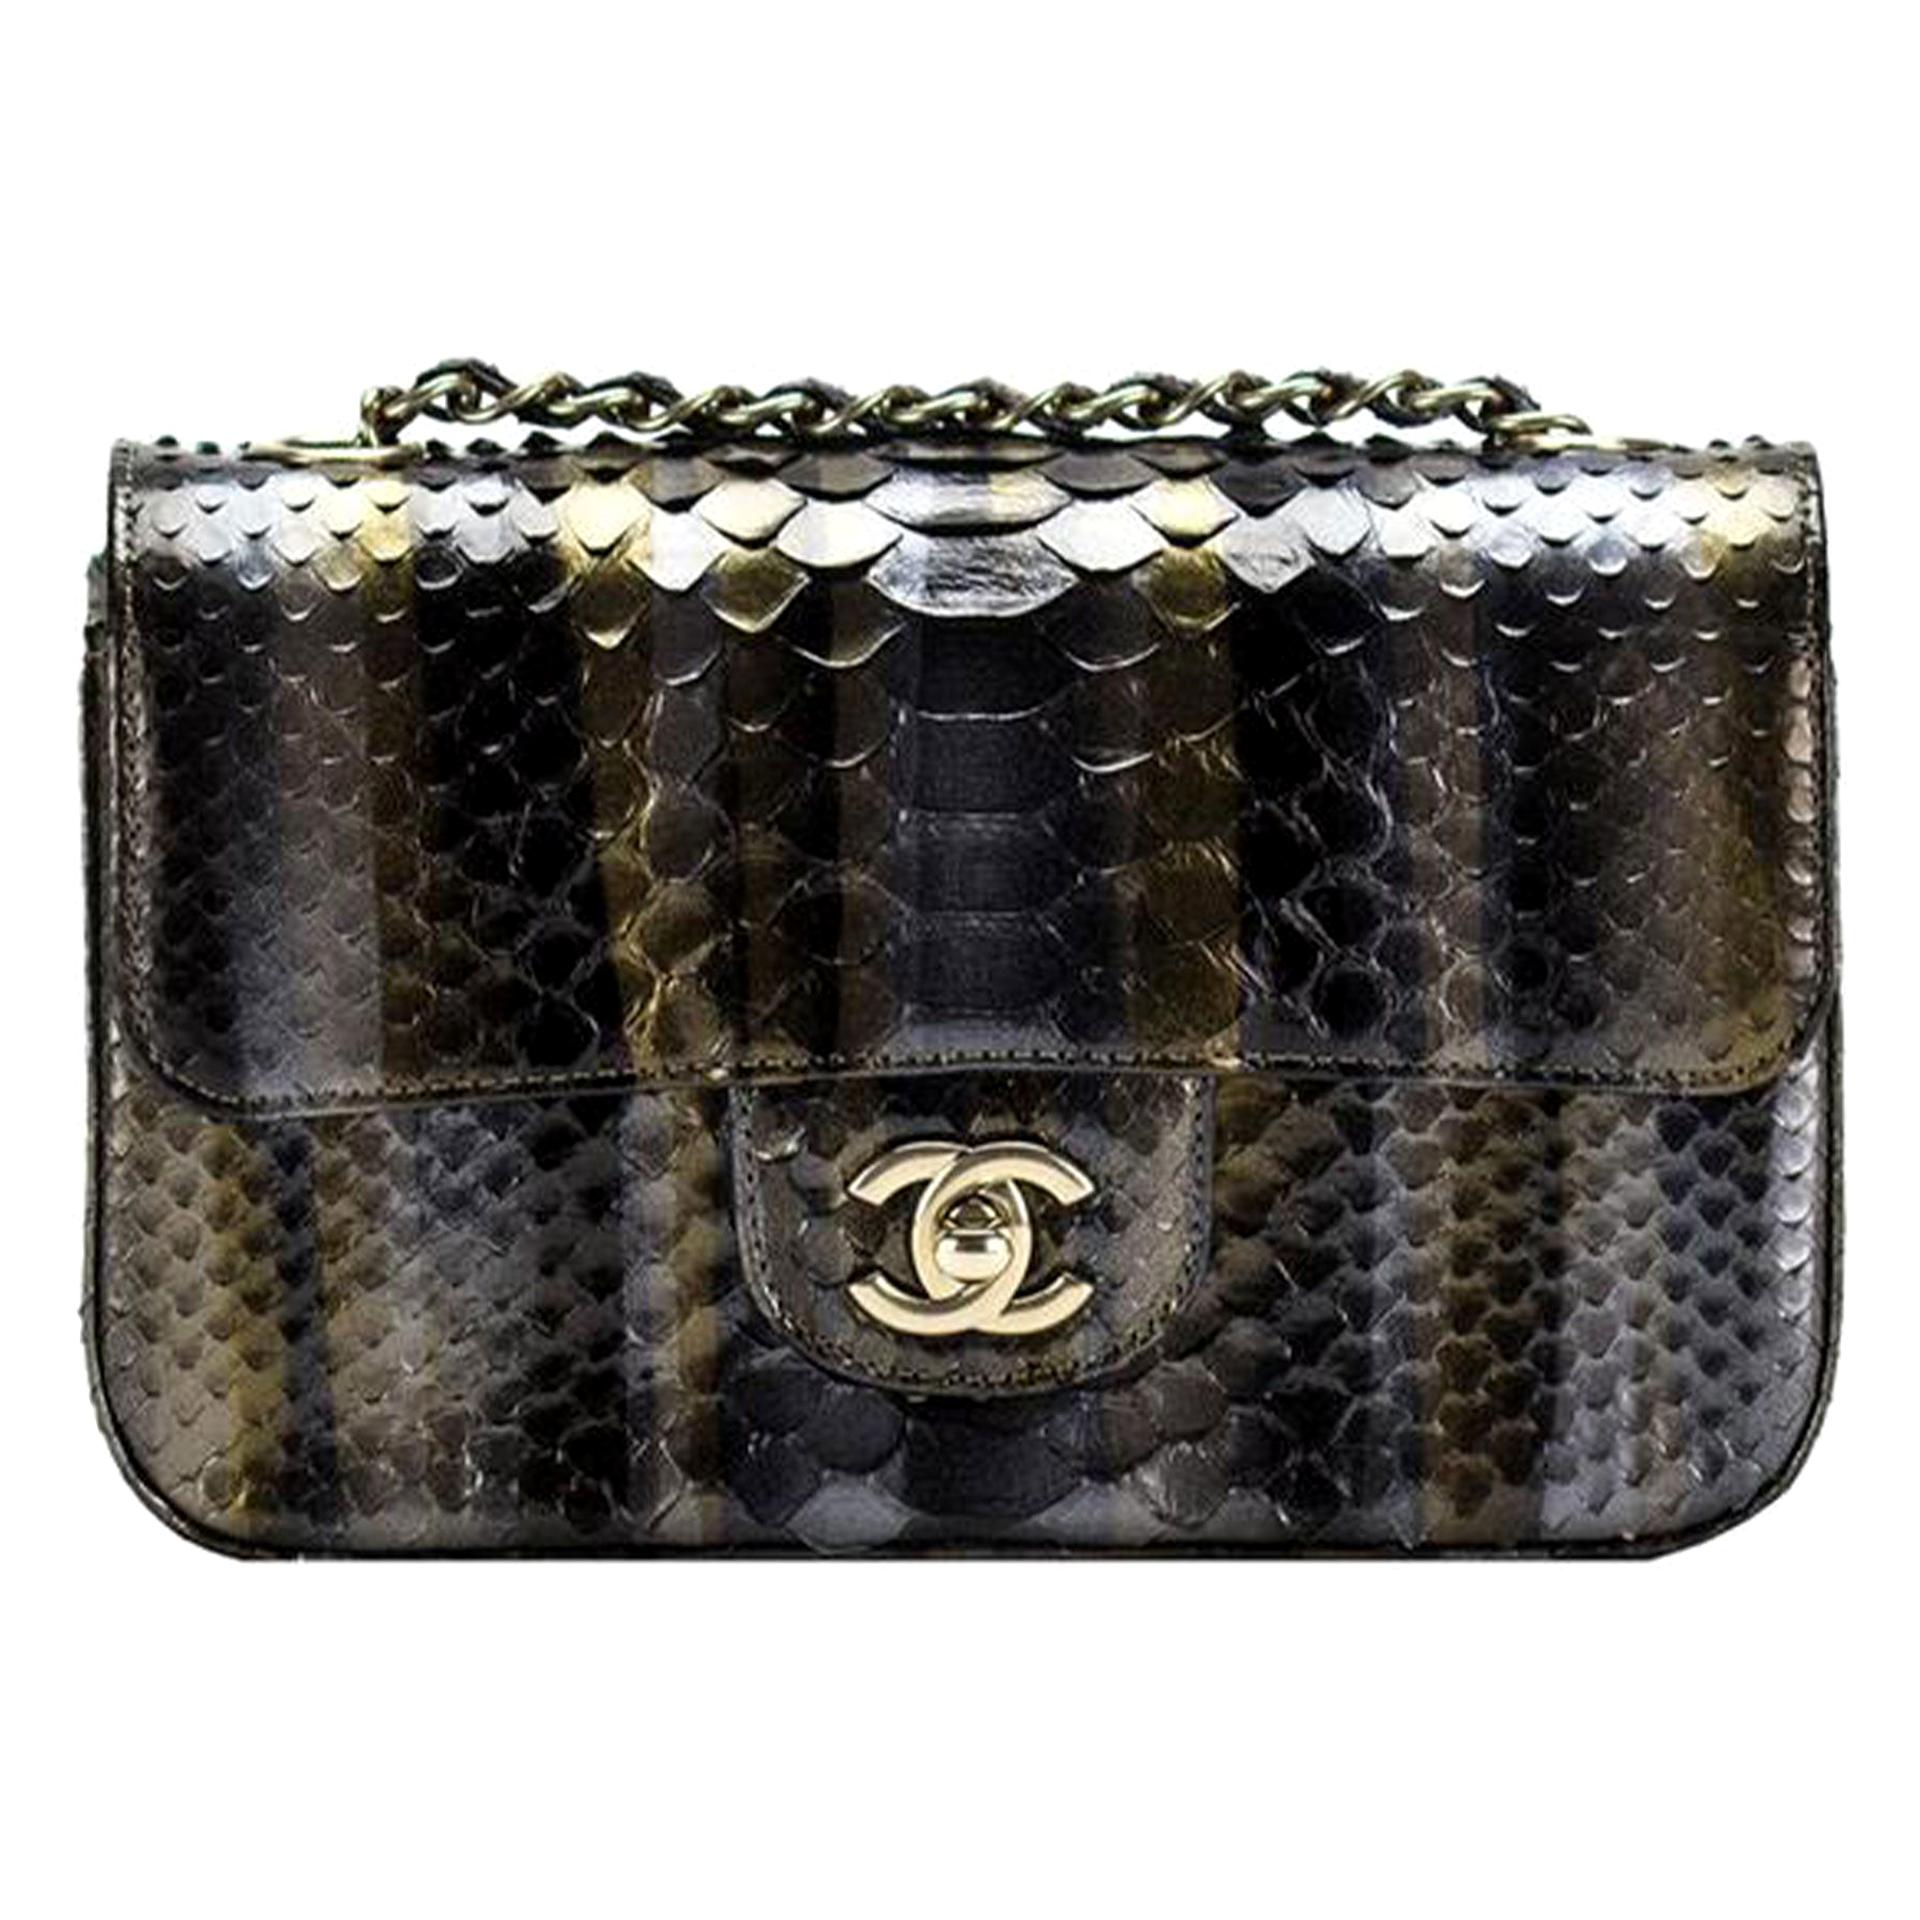 Chanel Ombré Python Exotic Snakeskin Rare Classic Flap